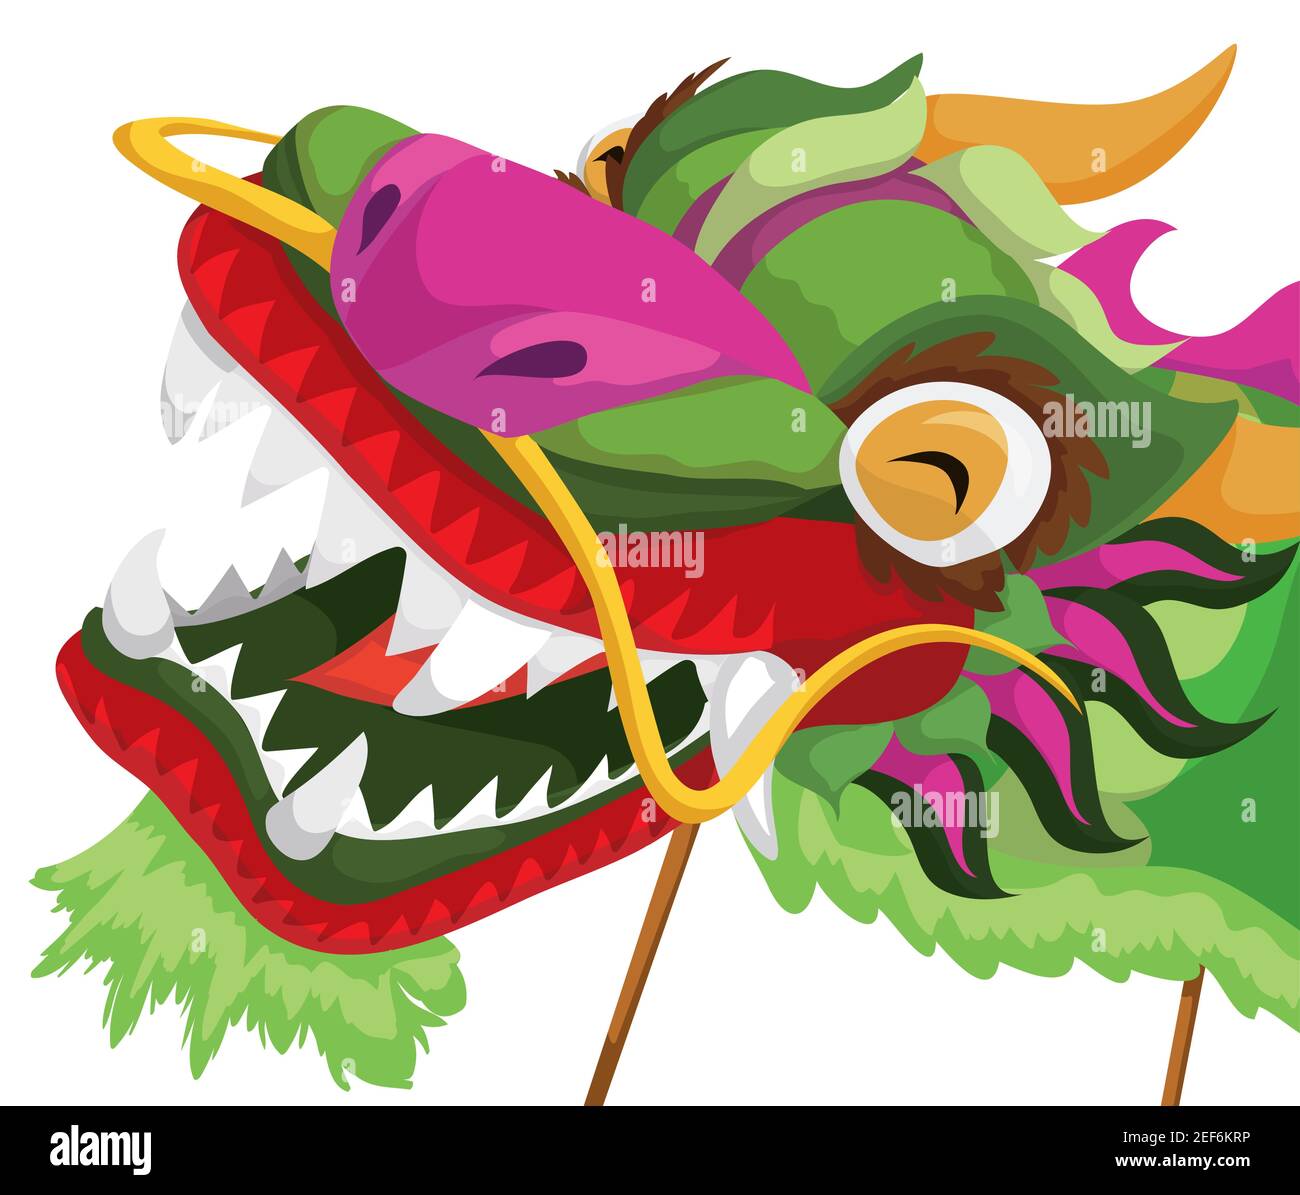 Happy head of Chinese dragon dancers and some poles holding it for traditional holidays, isolated over white background. Stock Vector